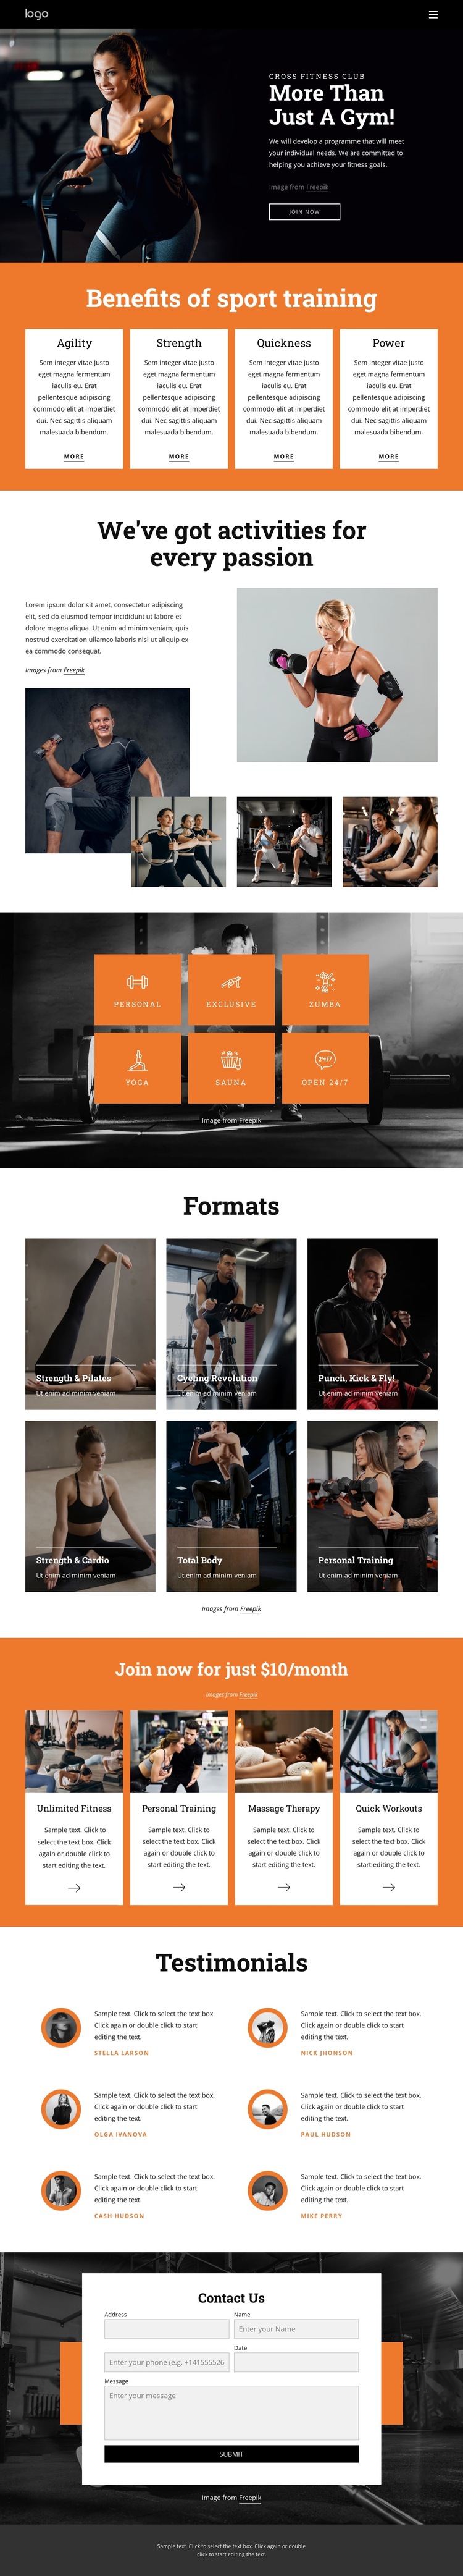 Join our community of fitness enthusiasts HTML5 Template